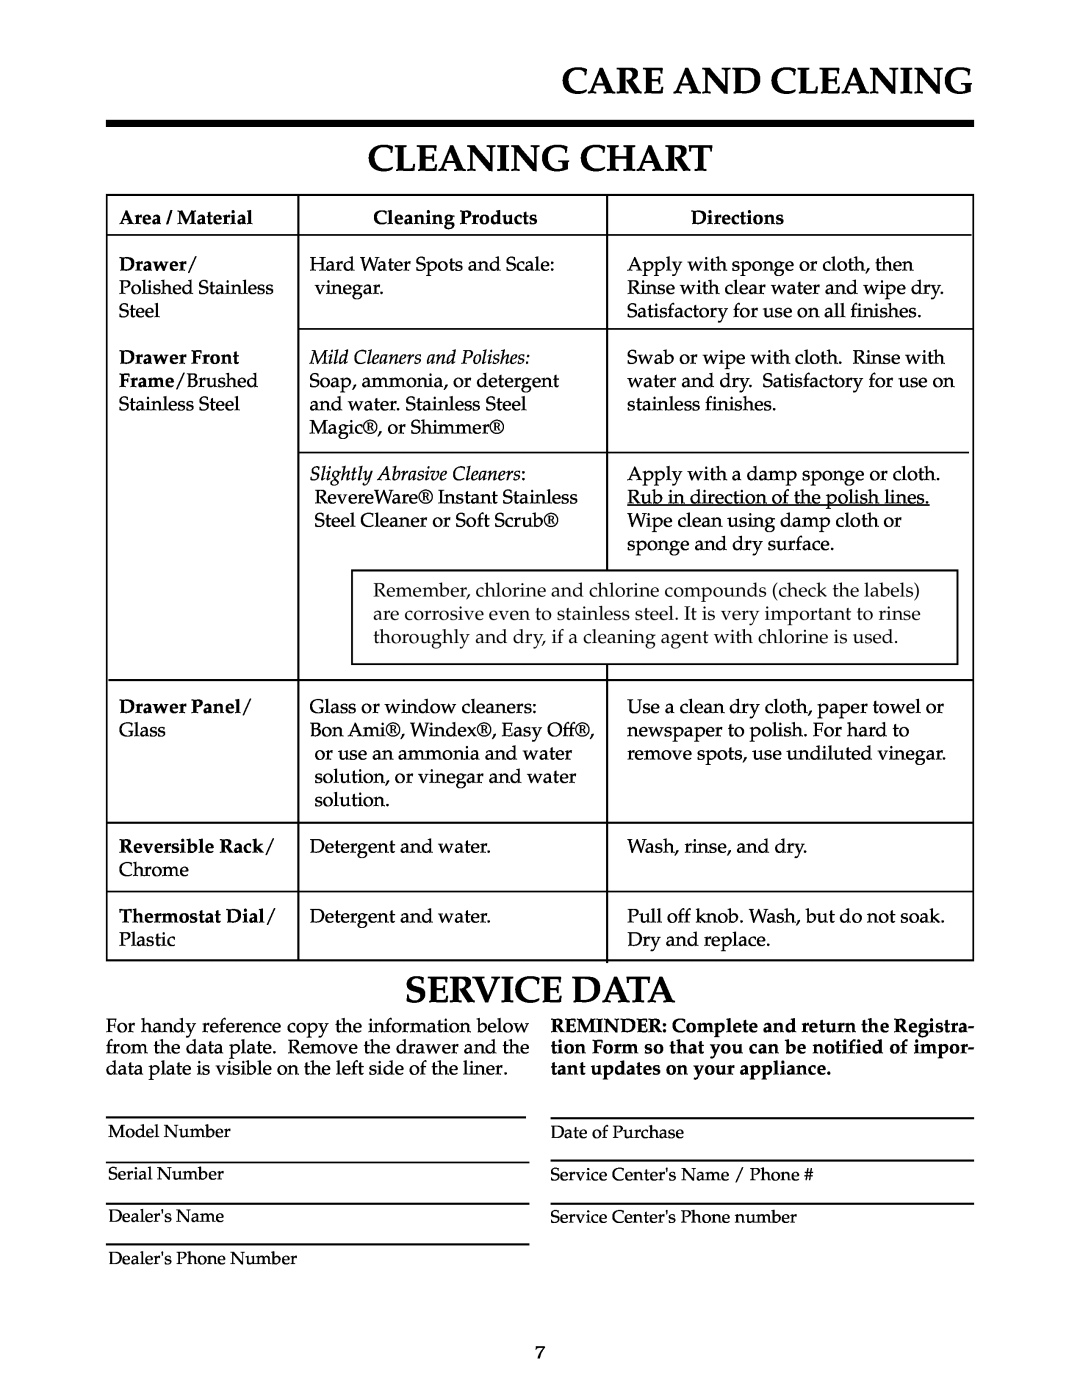 Thermador WD24, WD30 manual Cleaning Chart, Service Data, Area / Material, Cleaning Products, Directions, Drawer Front 